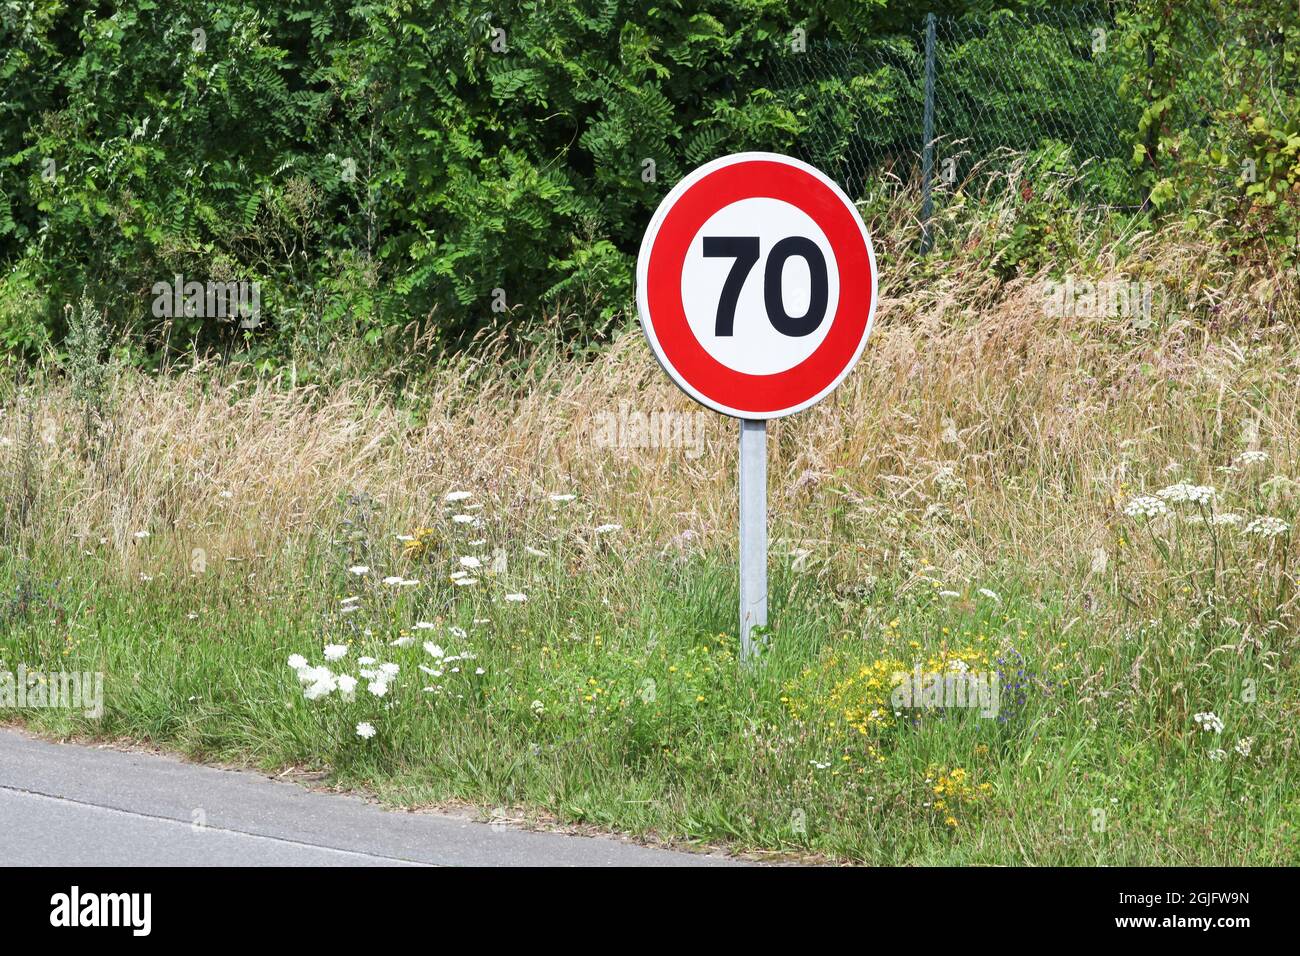 Speed limit traffic sign 70 in France Stock Photo